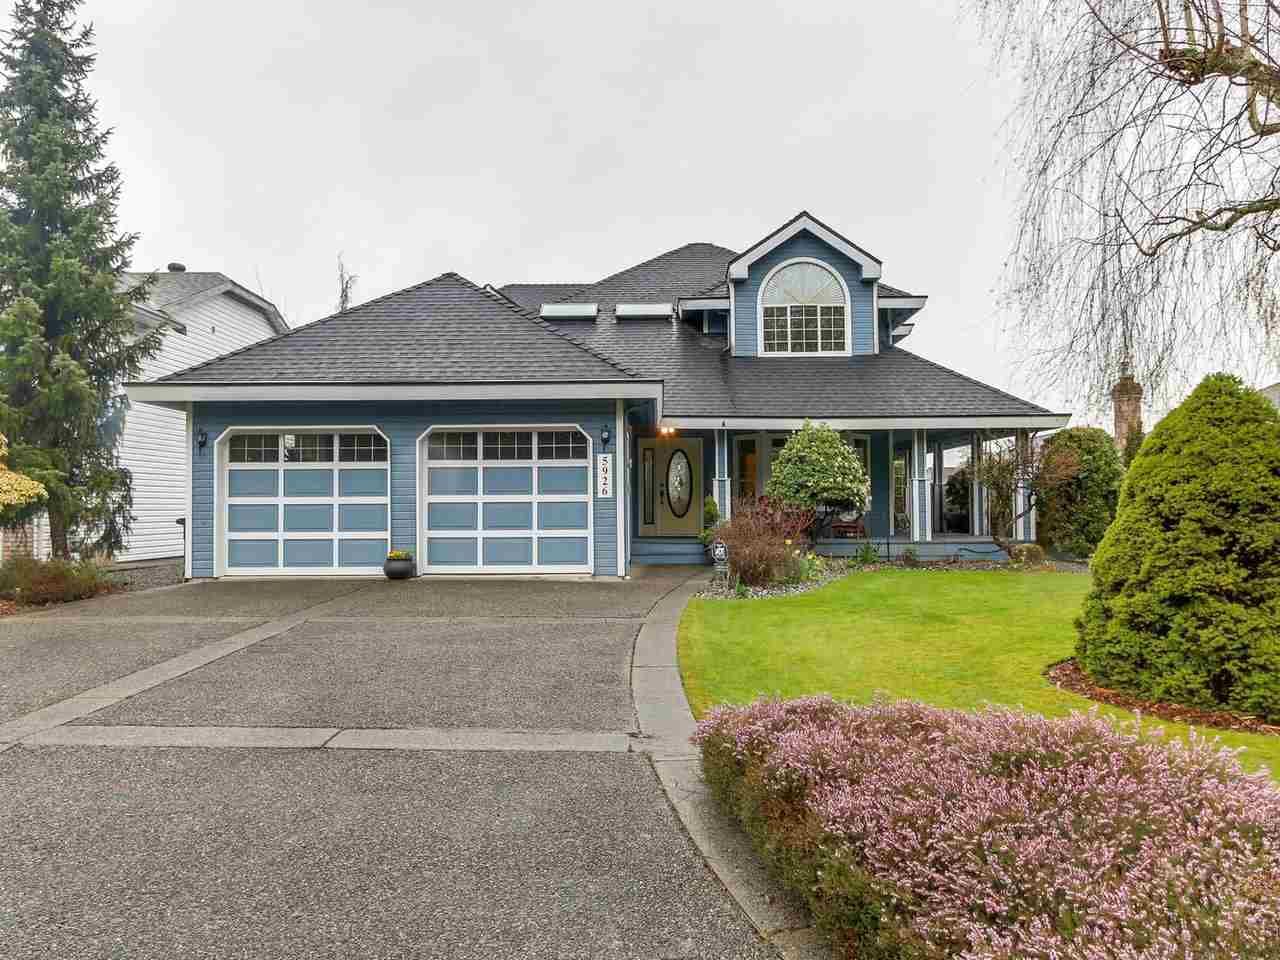 Main Photo: 5926 187A Street in Surrey: Cloverdale BC House for sale (Cloverdale)  : MLS®# R2254010